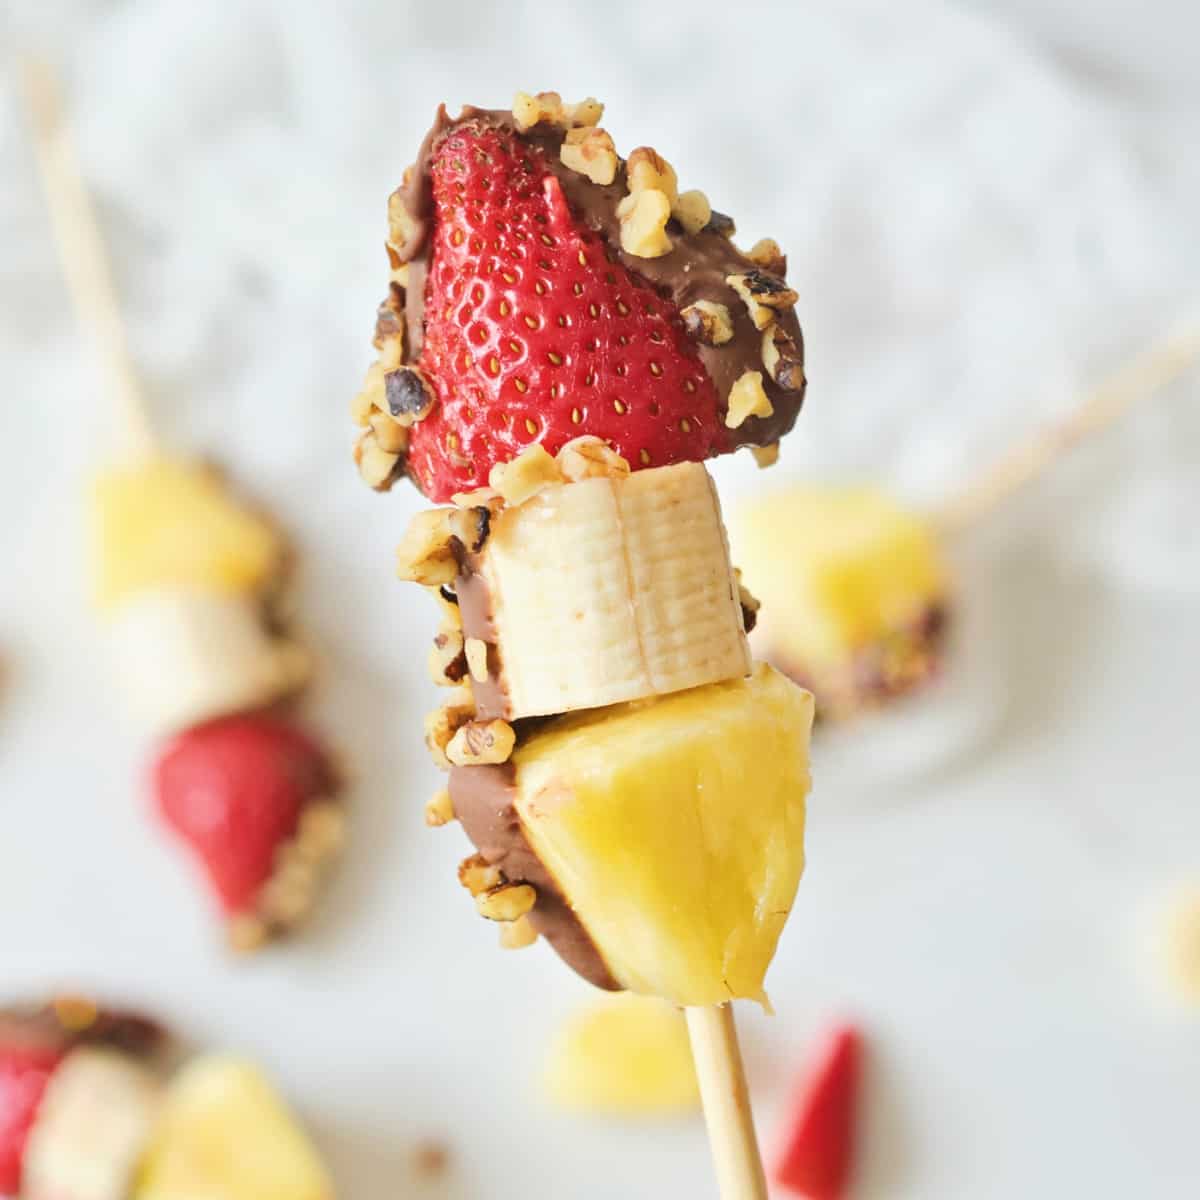 Banana Split on a Stick  – The Ultimate Way to Enjoy a Banana Split, Without the Guilt!